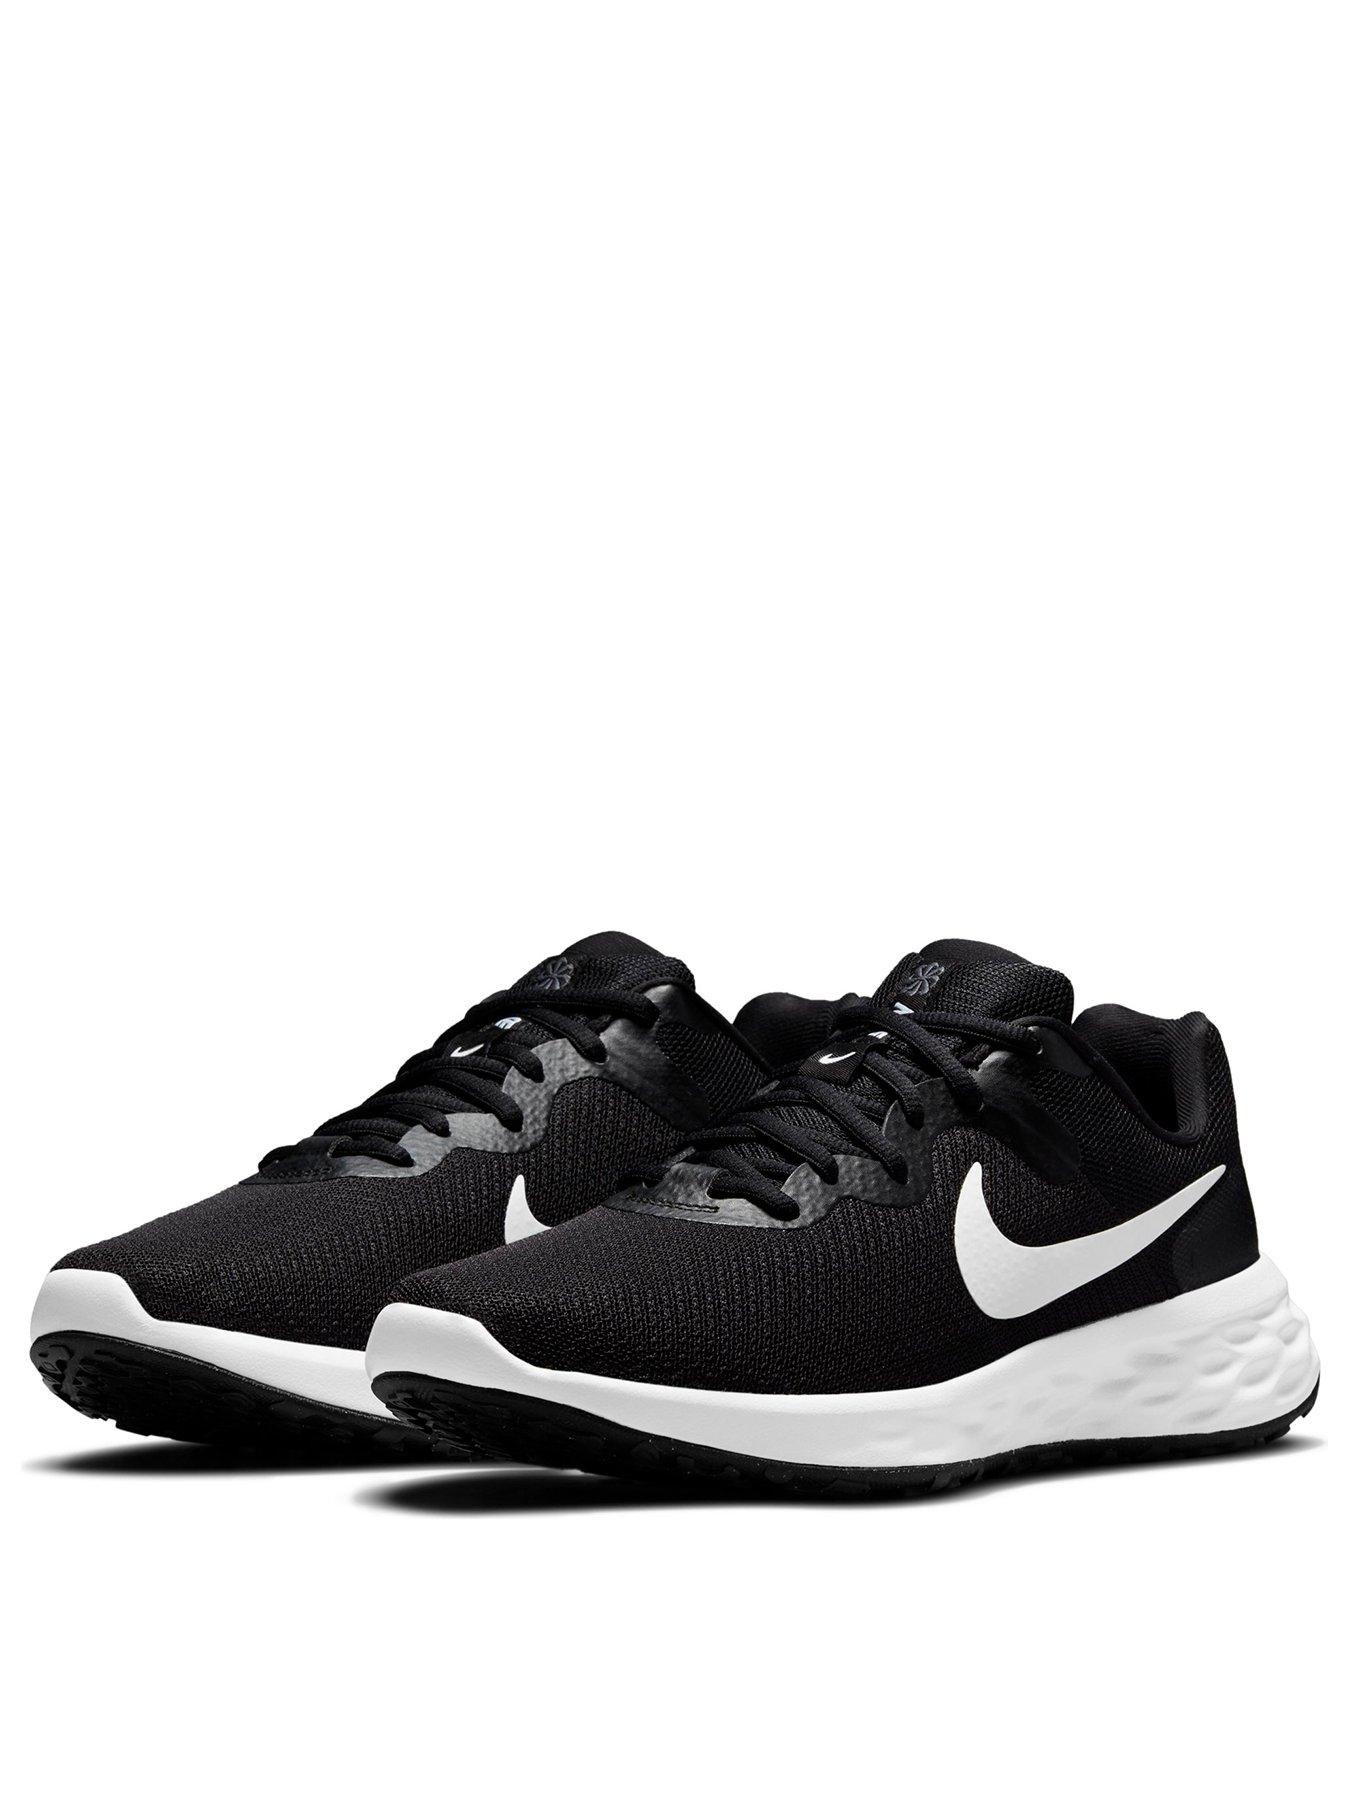 Mens Trainers | Shop Mens Trainers | Very.co.uk